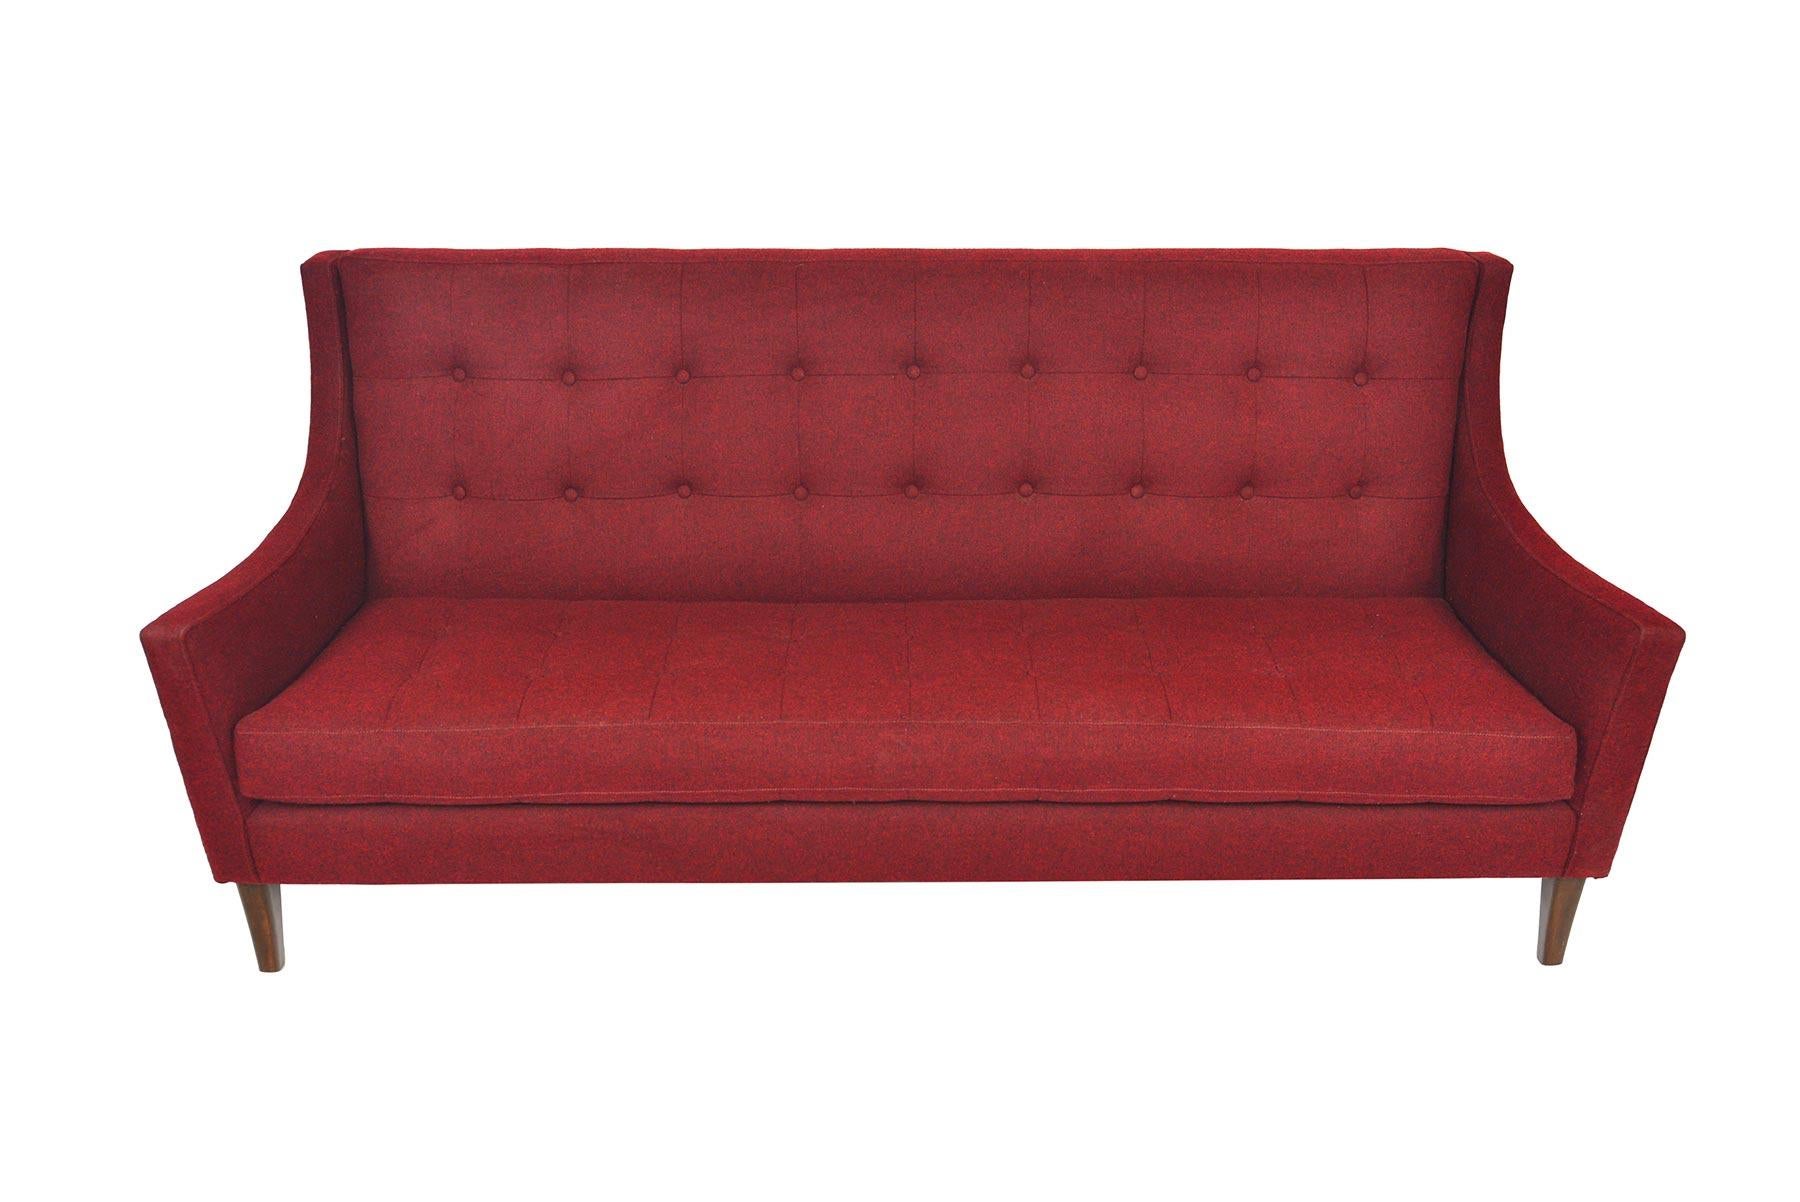 This Classic American midcentury three-seat sofa from the 1950s was designed with a stunning profile! Flared armrests adjoin to the high backrest. Beautifully tufted detailing is featured on the backrest and the removable single cushion. Sofa stands